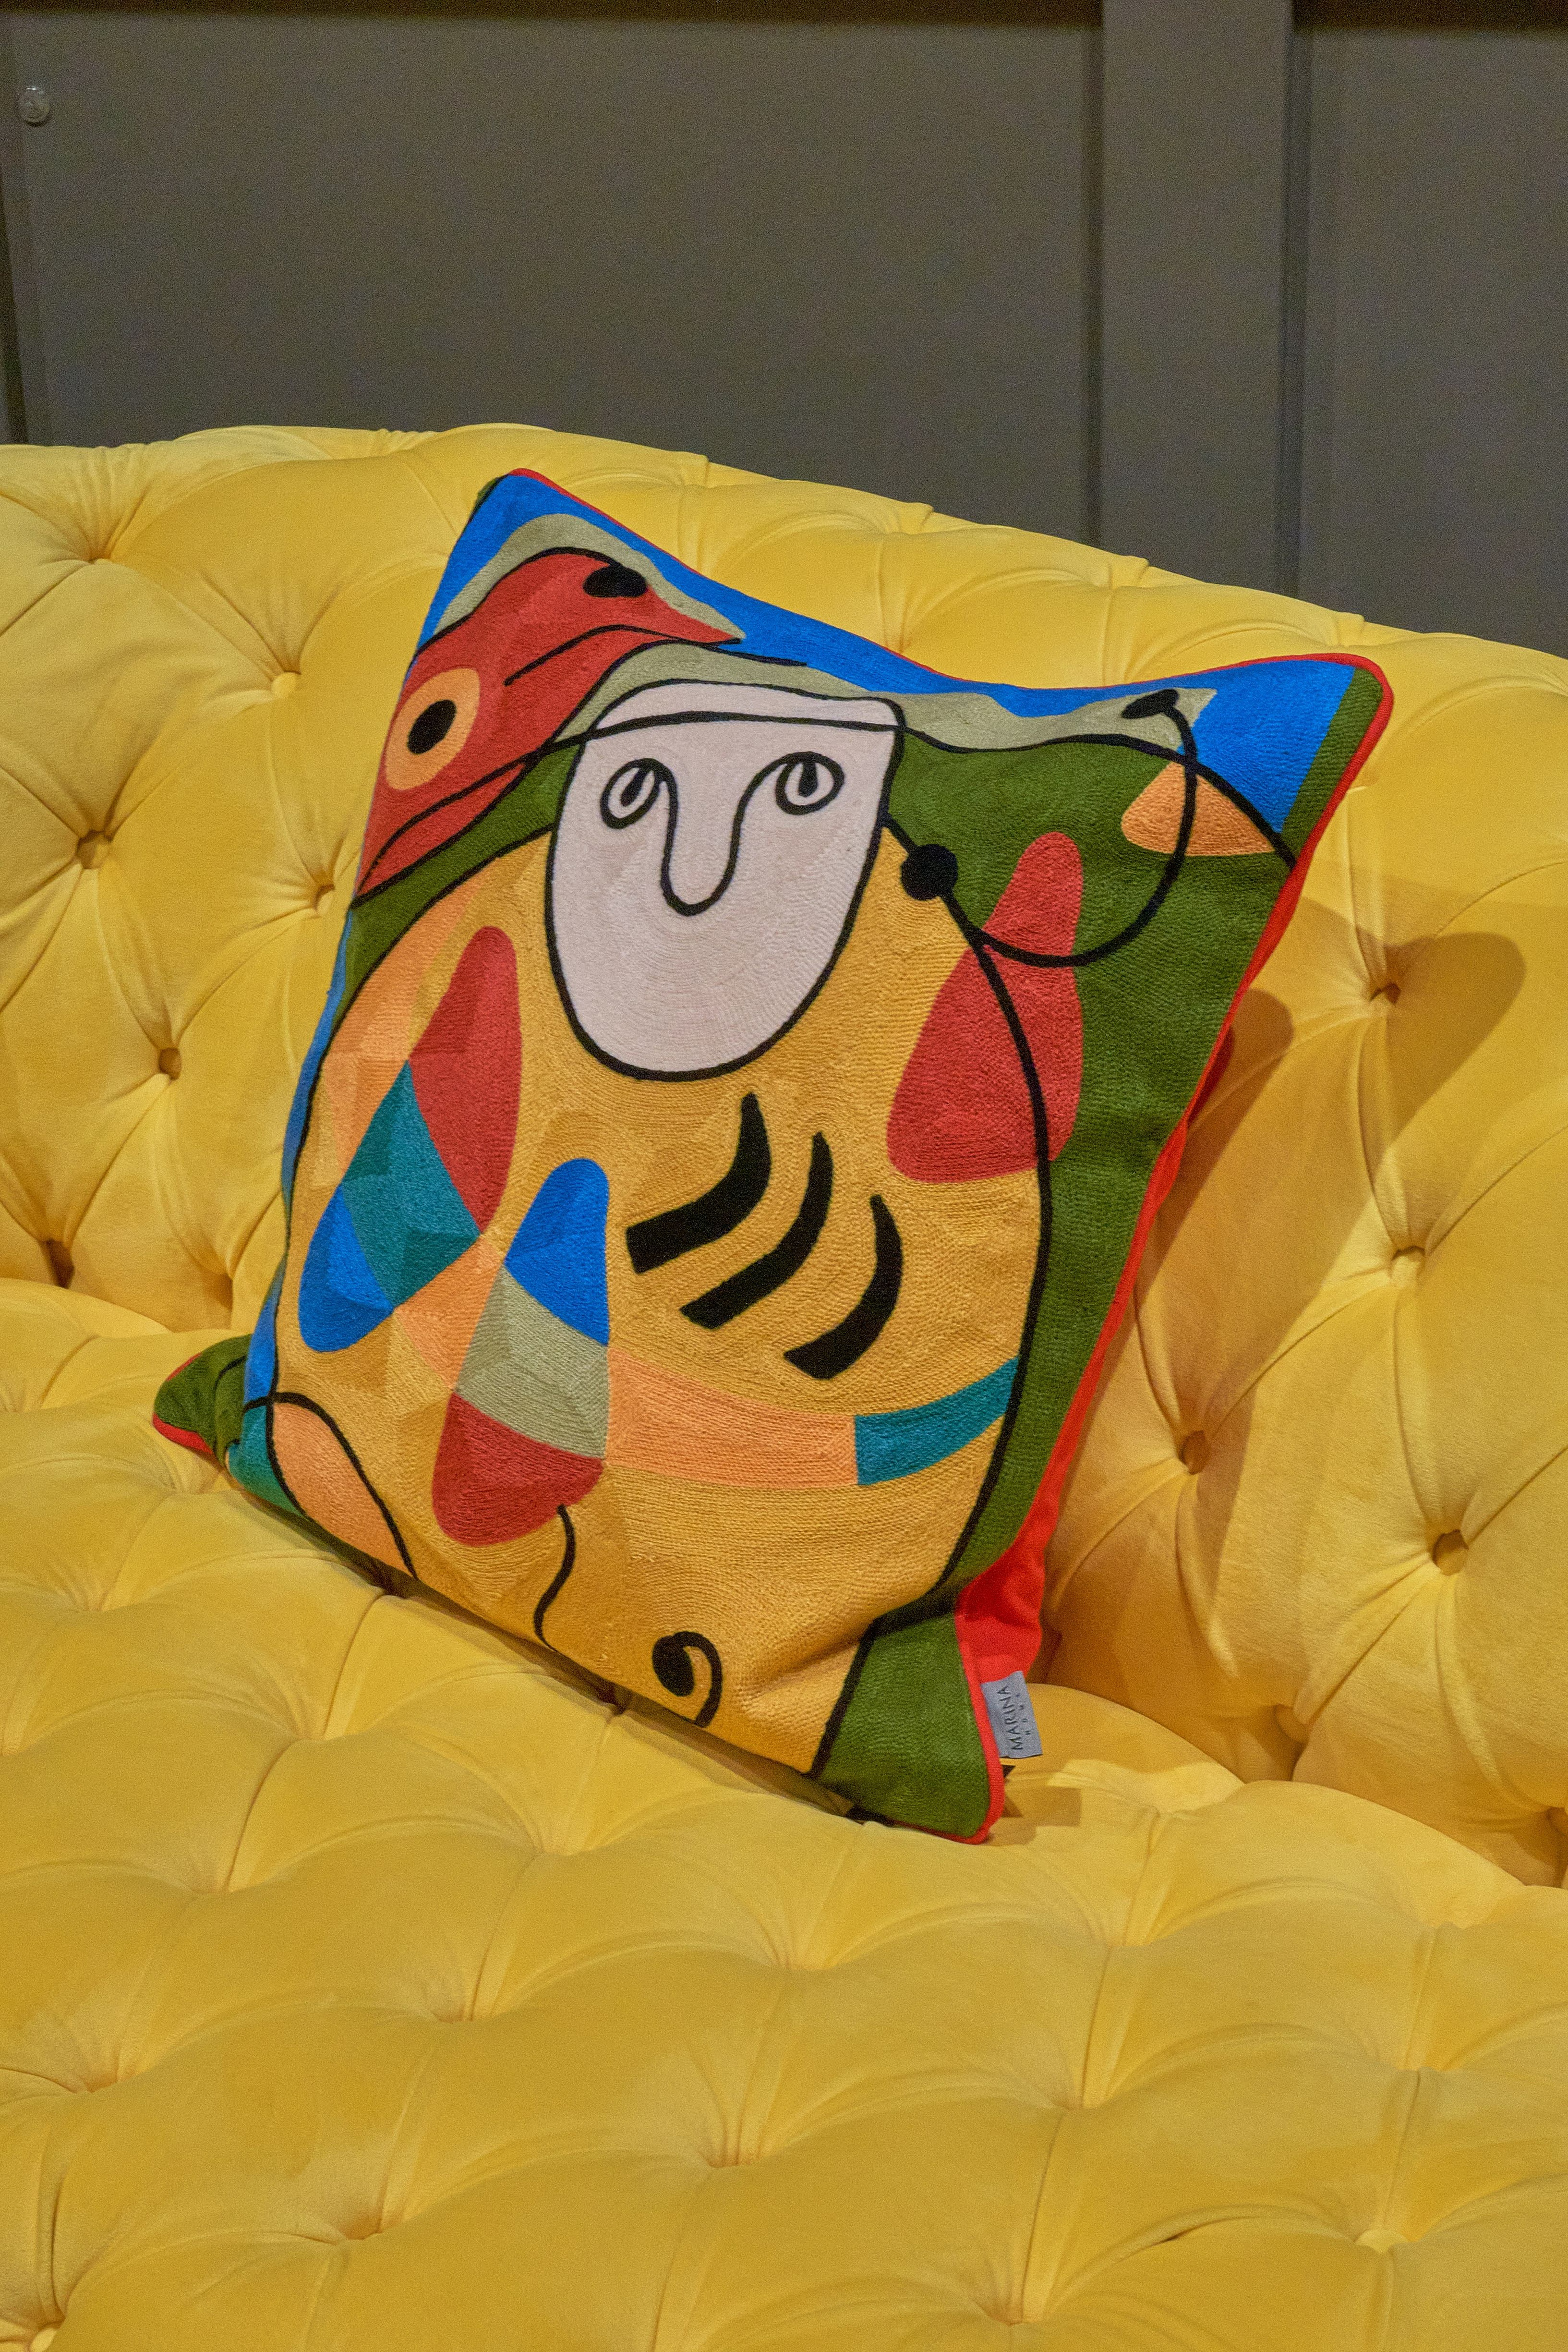 A square cushion with an abstract face and patterns in vibrant blues, greens, and oranges sits on a yellow sofa.